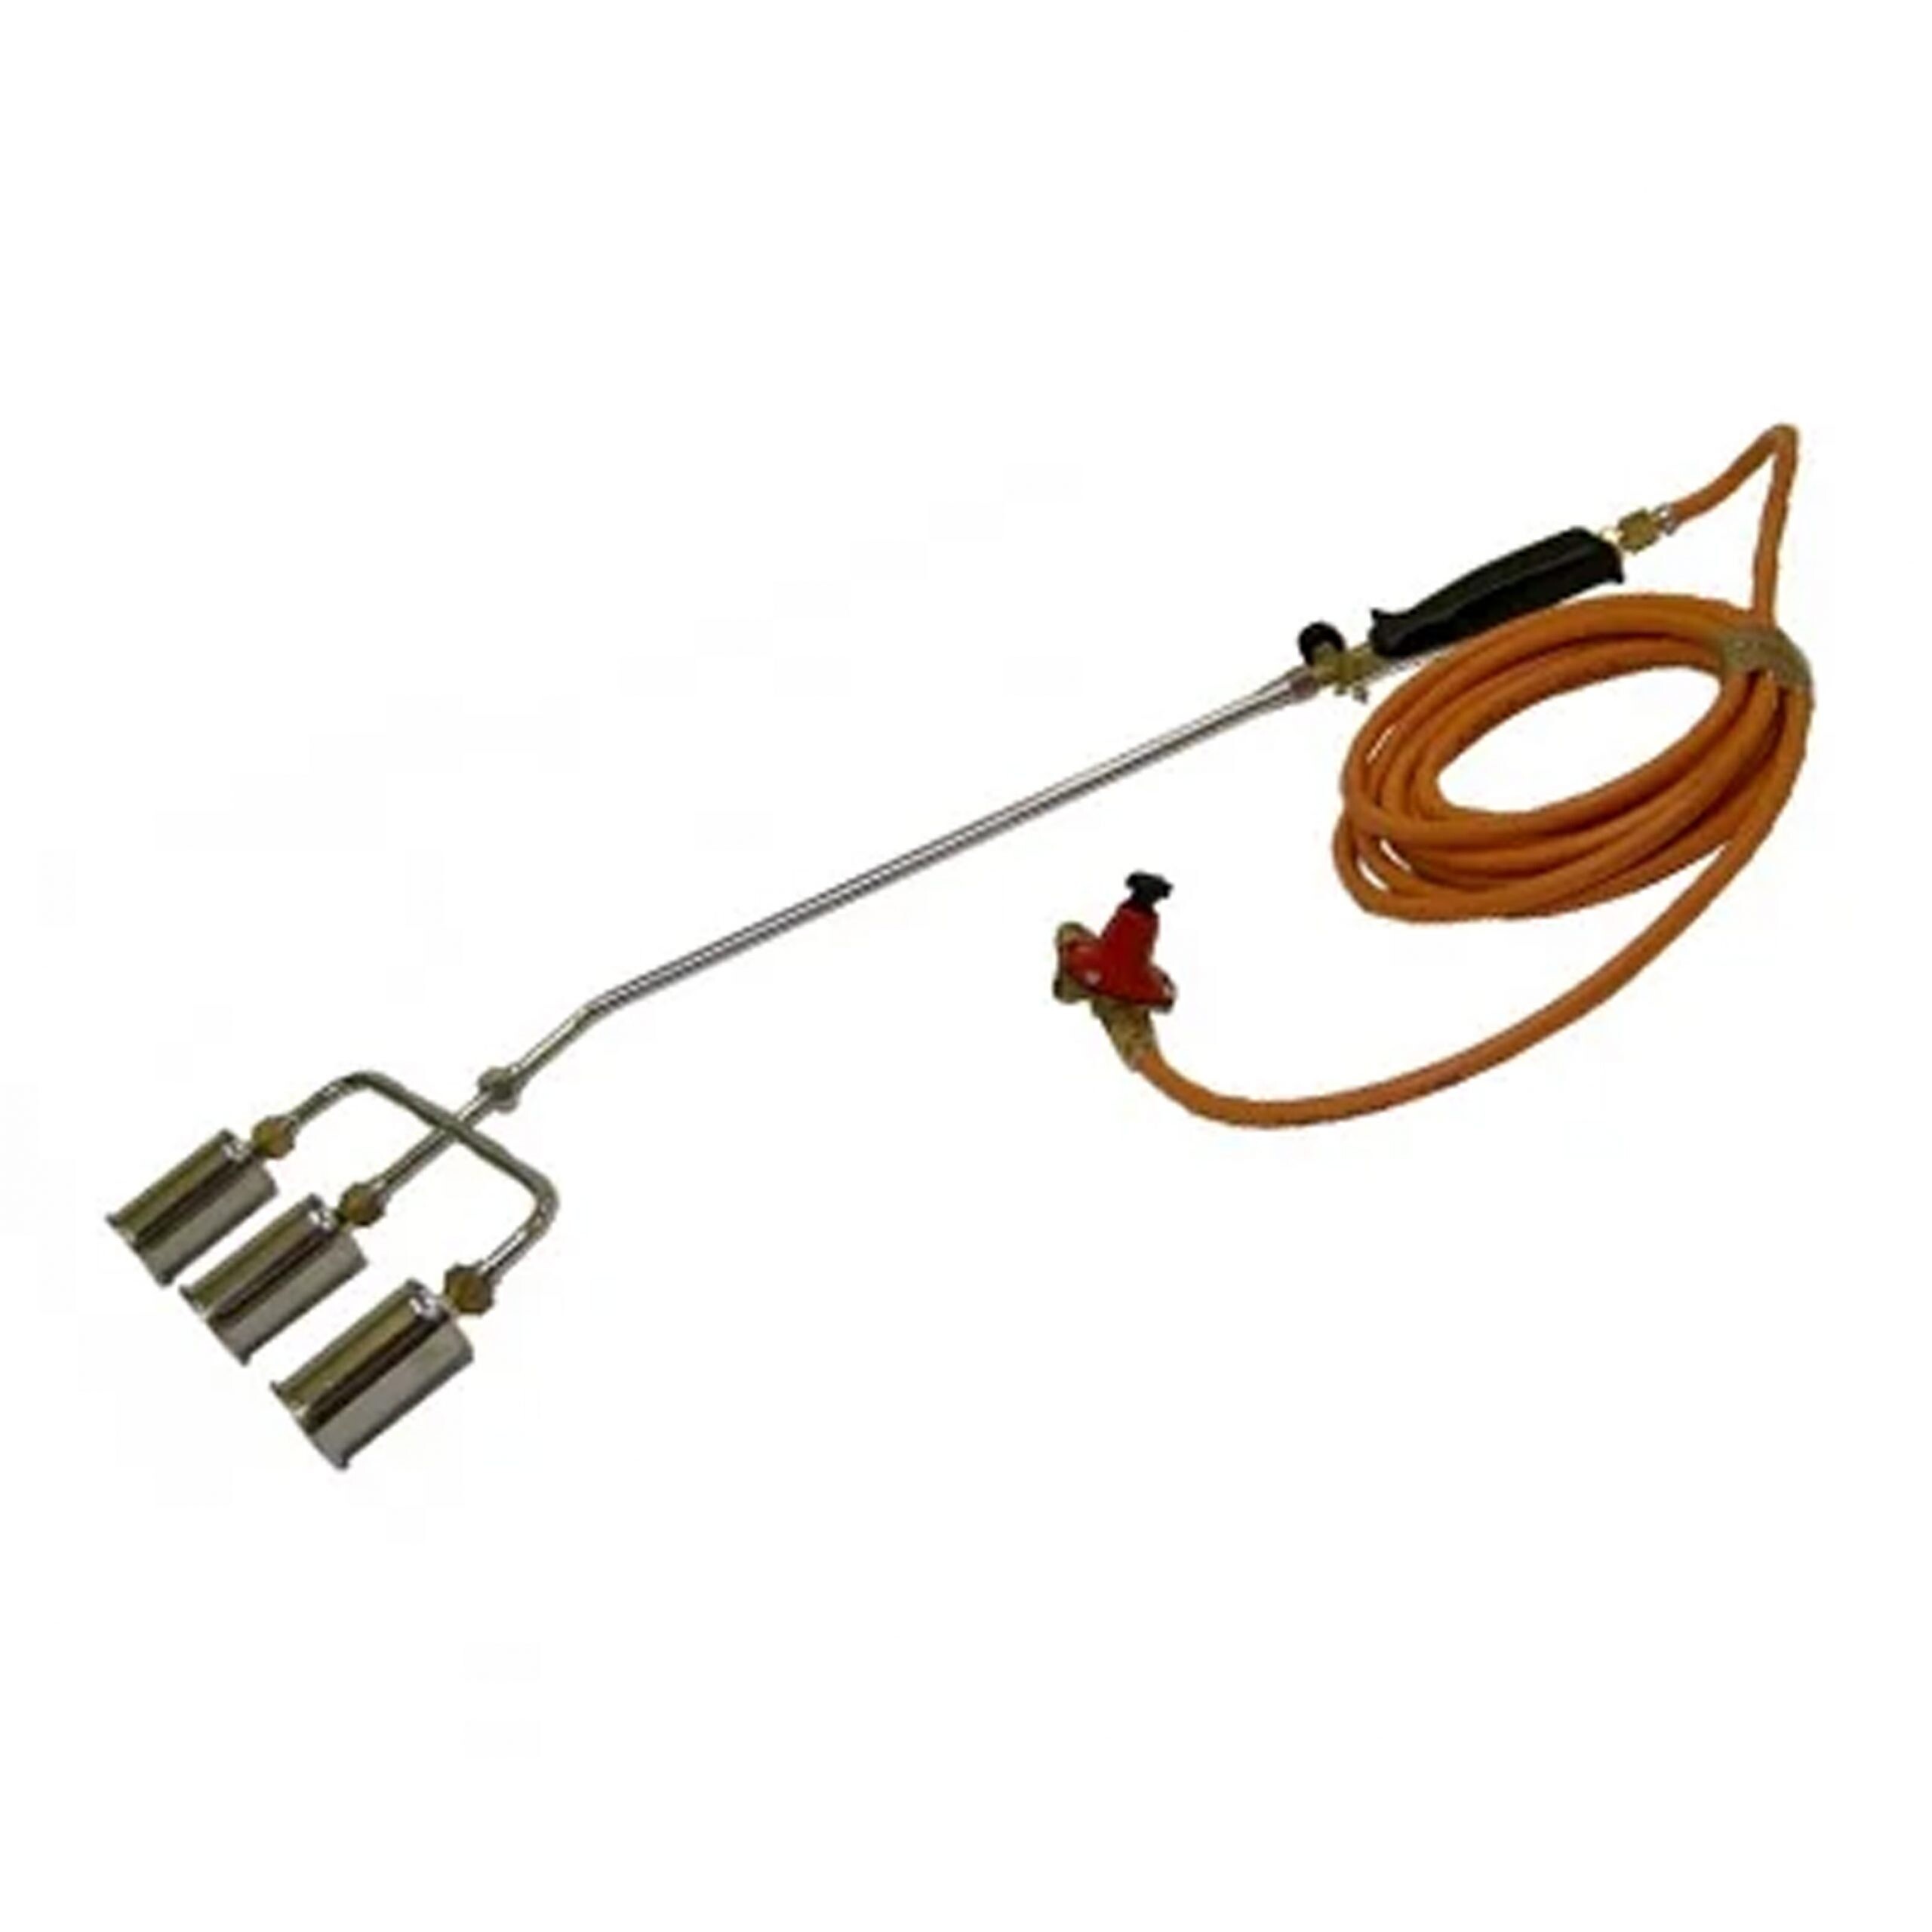 Gas Torch Double / Triple Head Burner With 1 Metre Handle